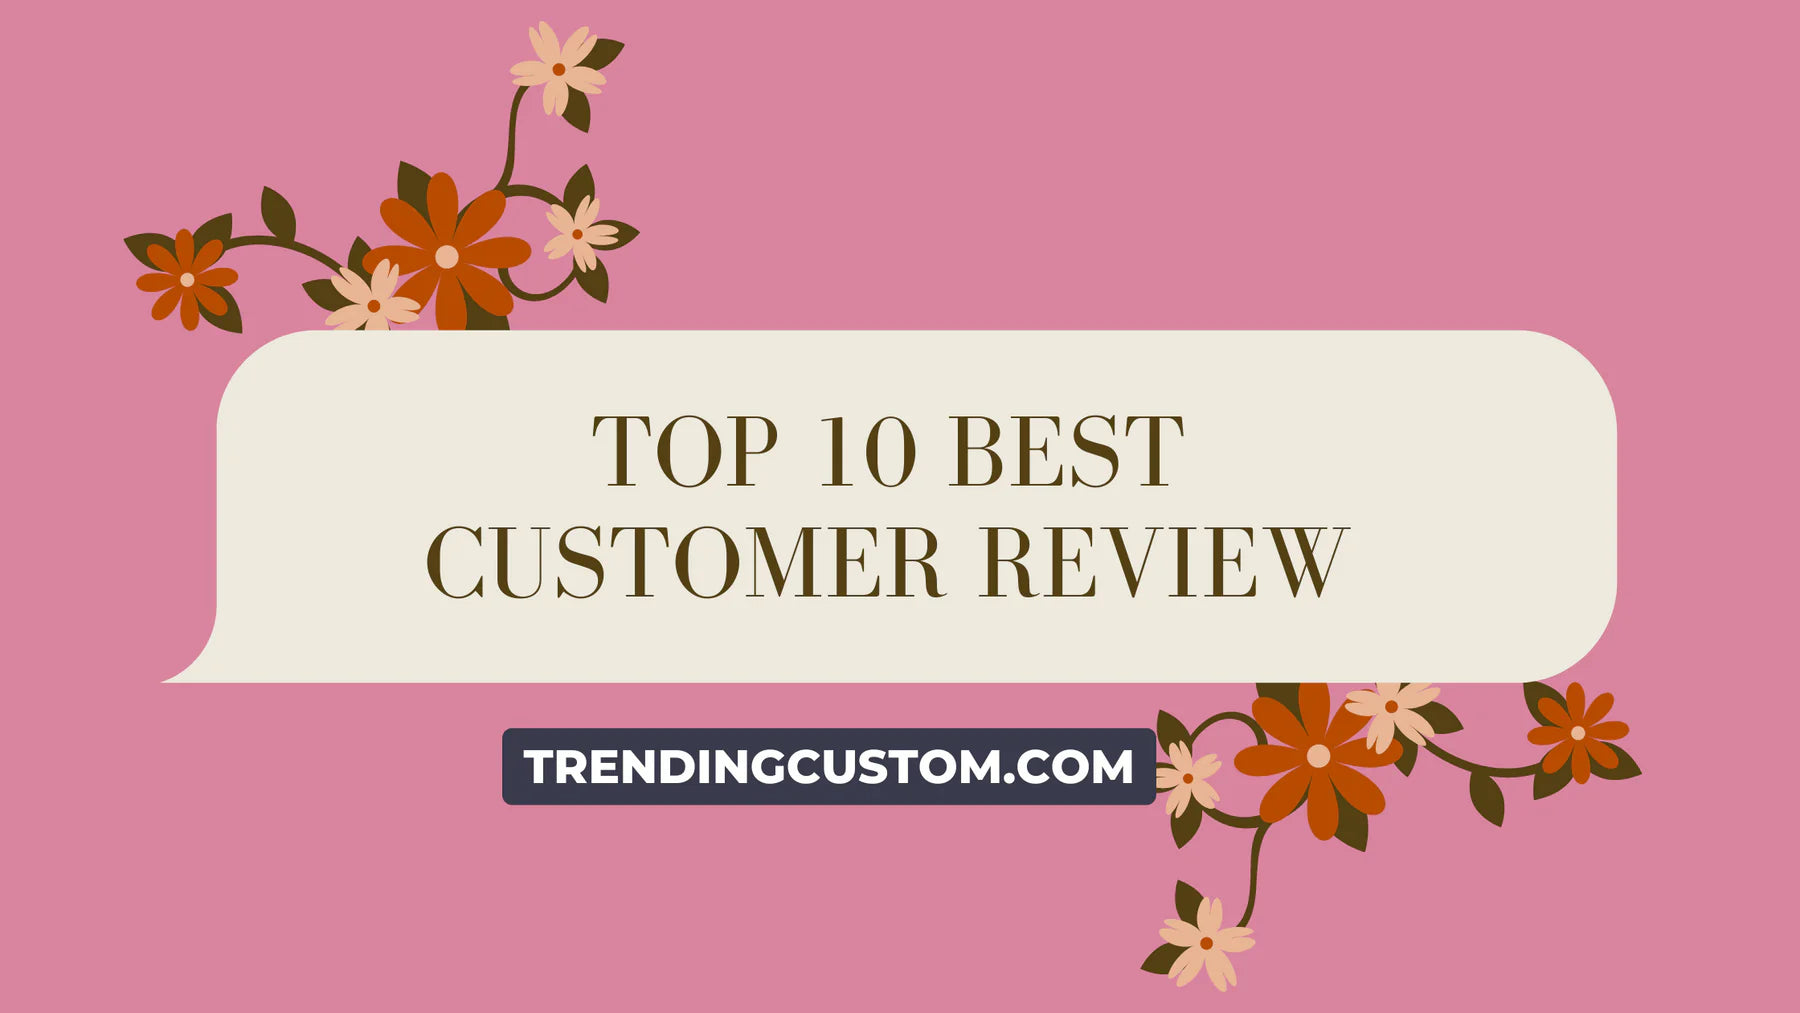 Top 10 Raving Reviews: Our Customers Speak Out!